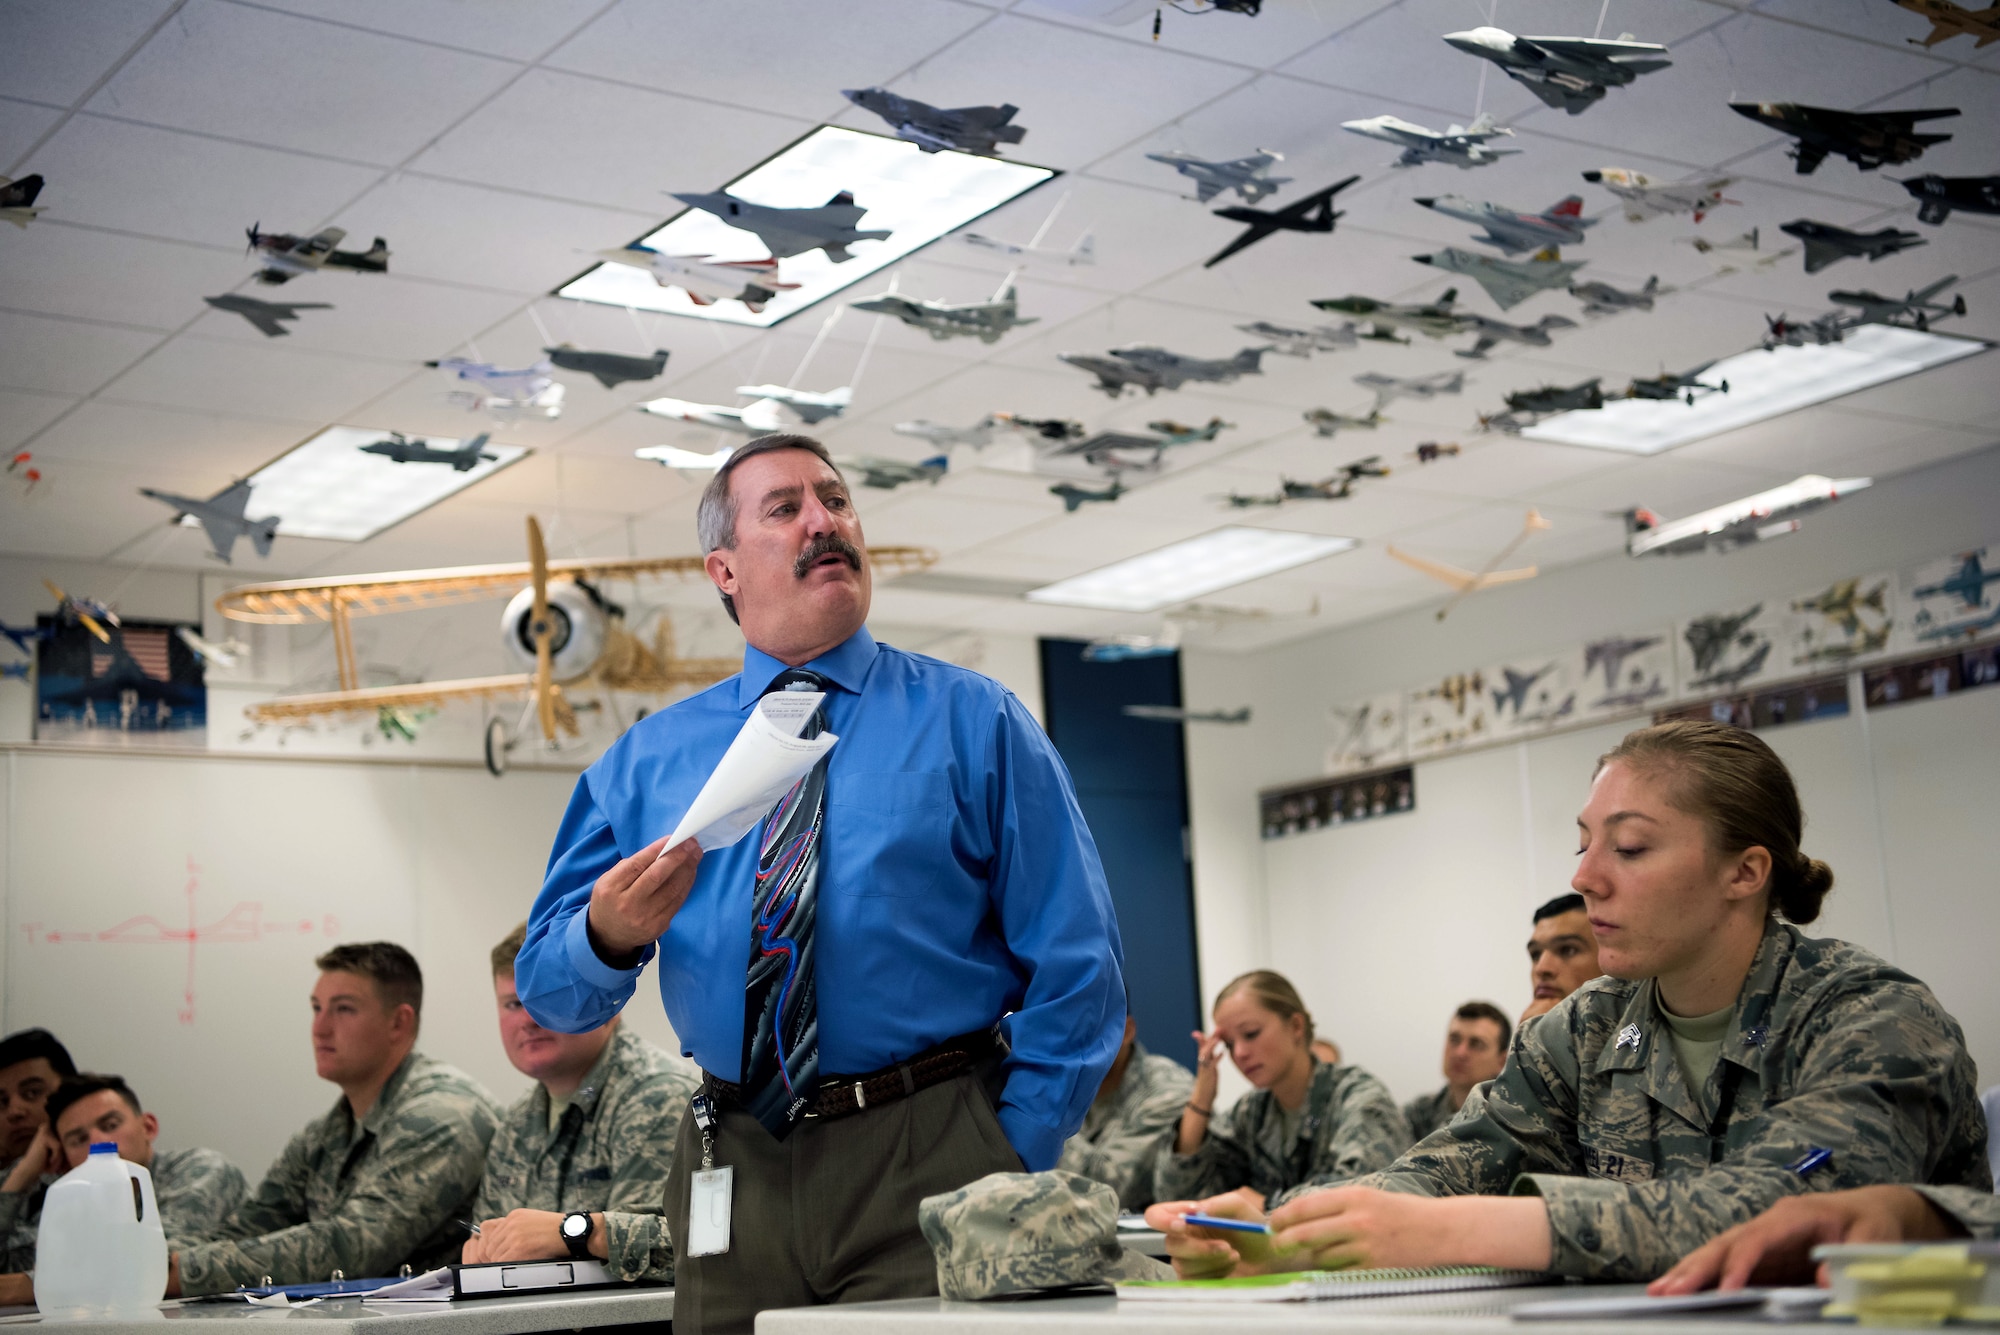 Air Force Academy officials recently announced the results of the institution’s academic accreditation from the Higher Learning Commission. The final report from the HLC found the university met all of the criteria for accreditation and federal compliance requirements without comments, reaffirming its accredited status until the 2028-2029 academic year. (U.S. Air Force photo/Trevor Cokley)